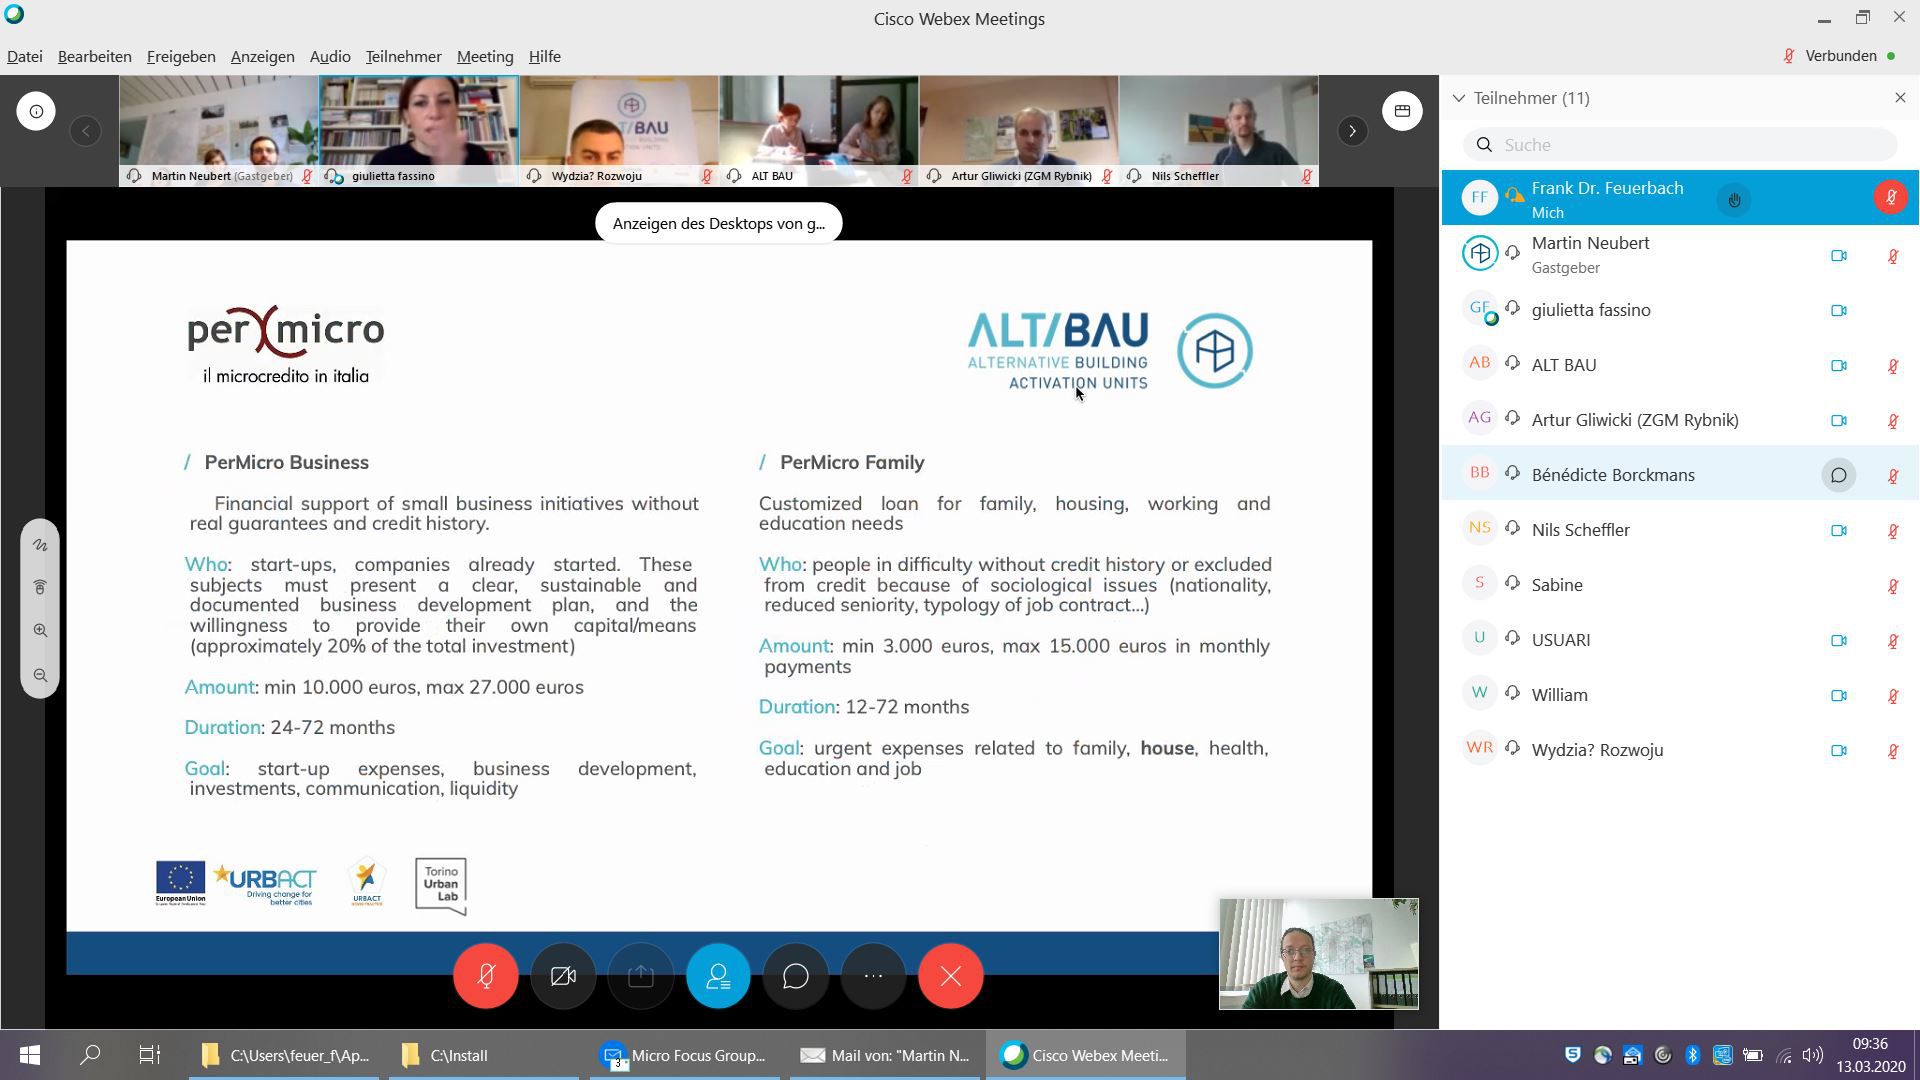 The Chemnitz Urban Planning Office continues to work on the ALT/BAU project via webinar